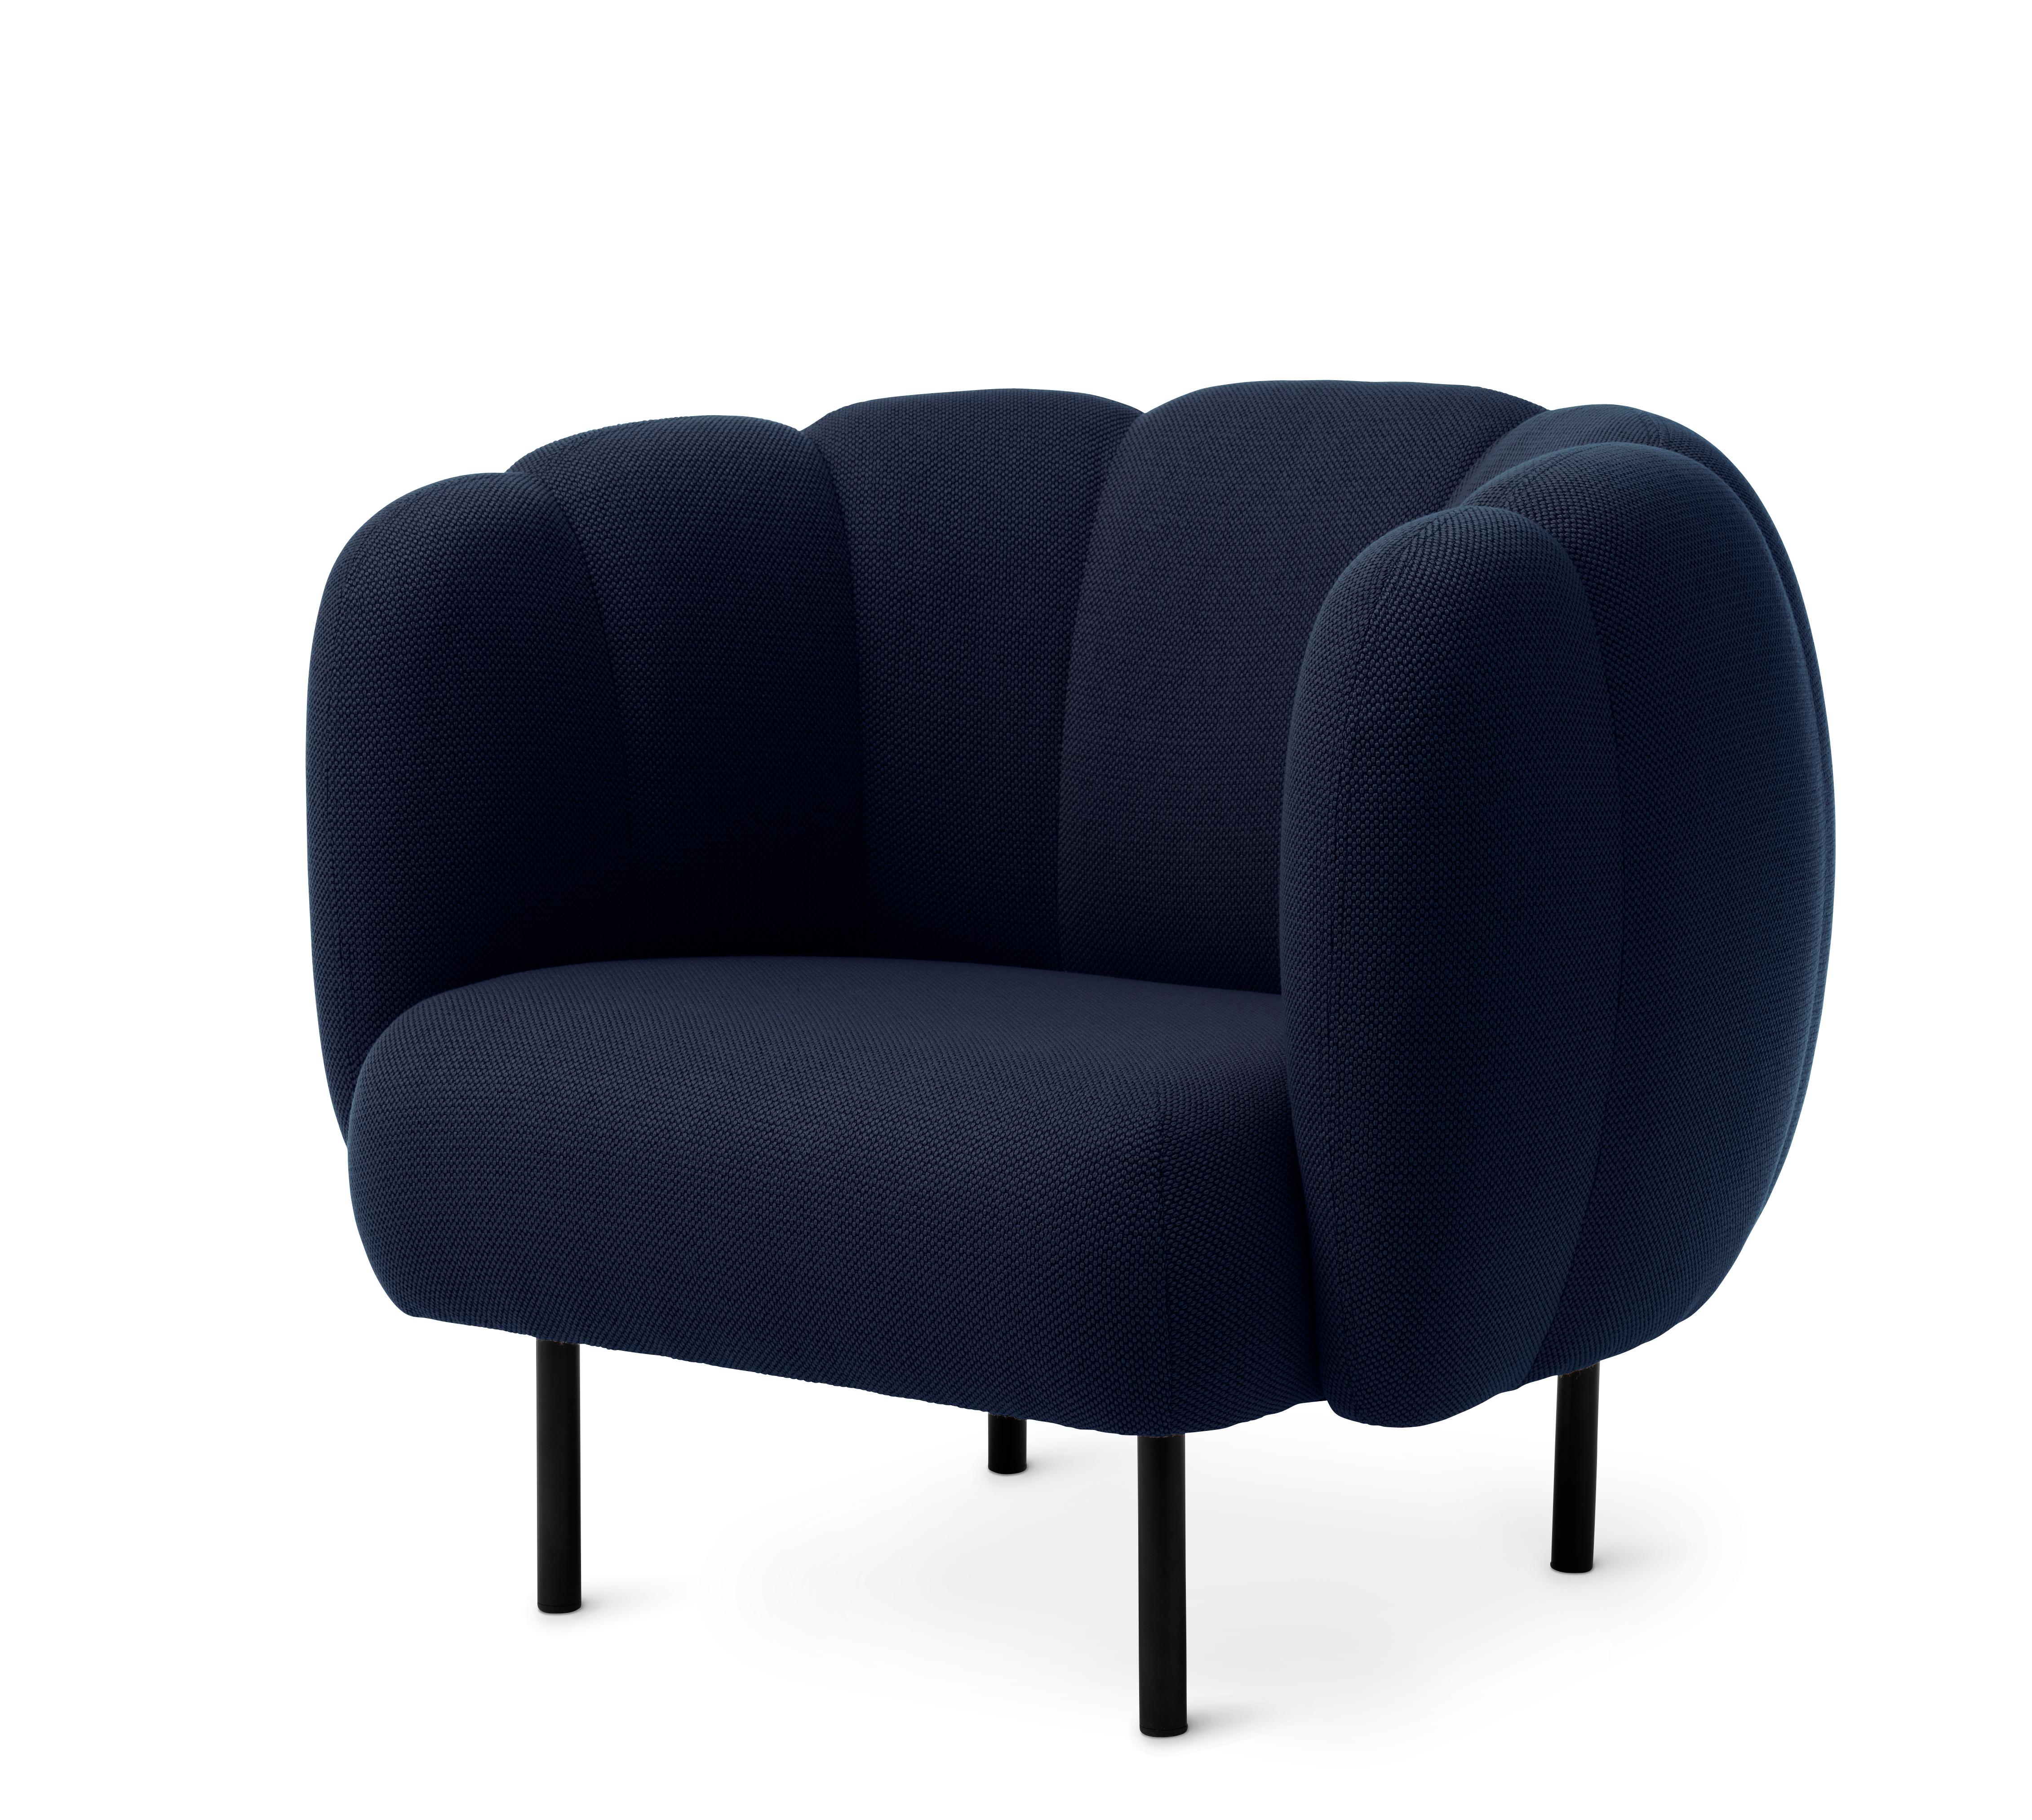 For Sale: Blue (Merit 005) Cape Lounge Chair with Stitches, by Charlotte Høncke from Warm Nordic 2